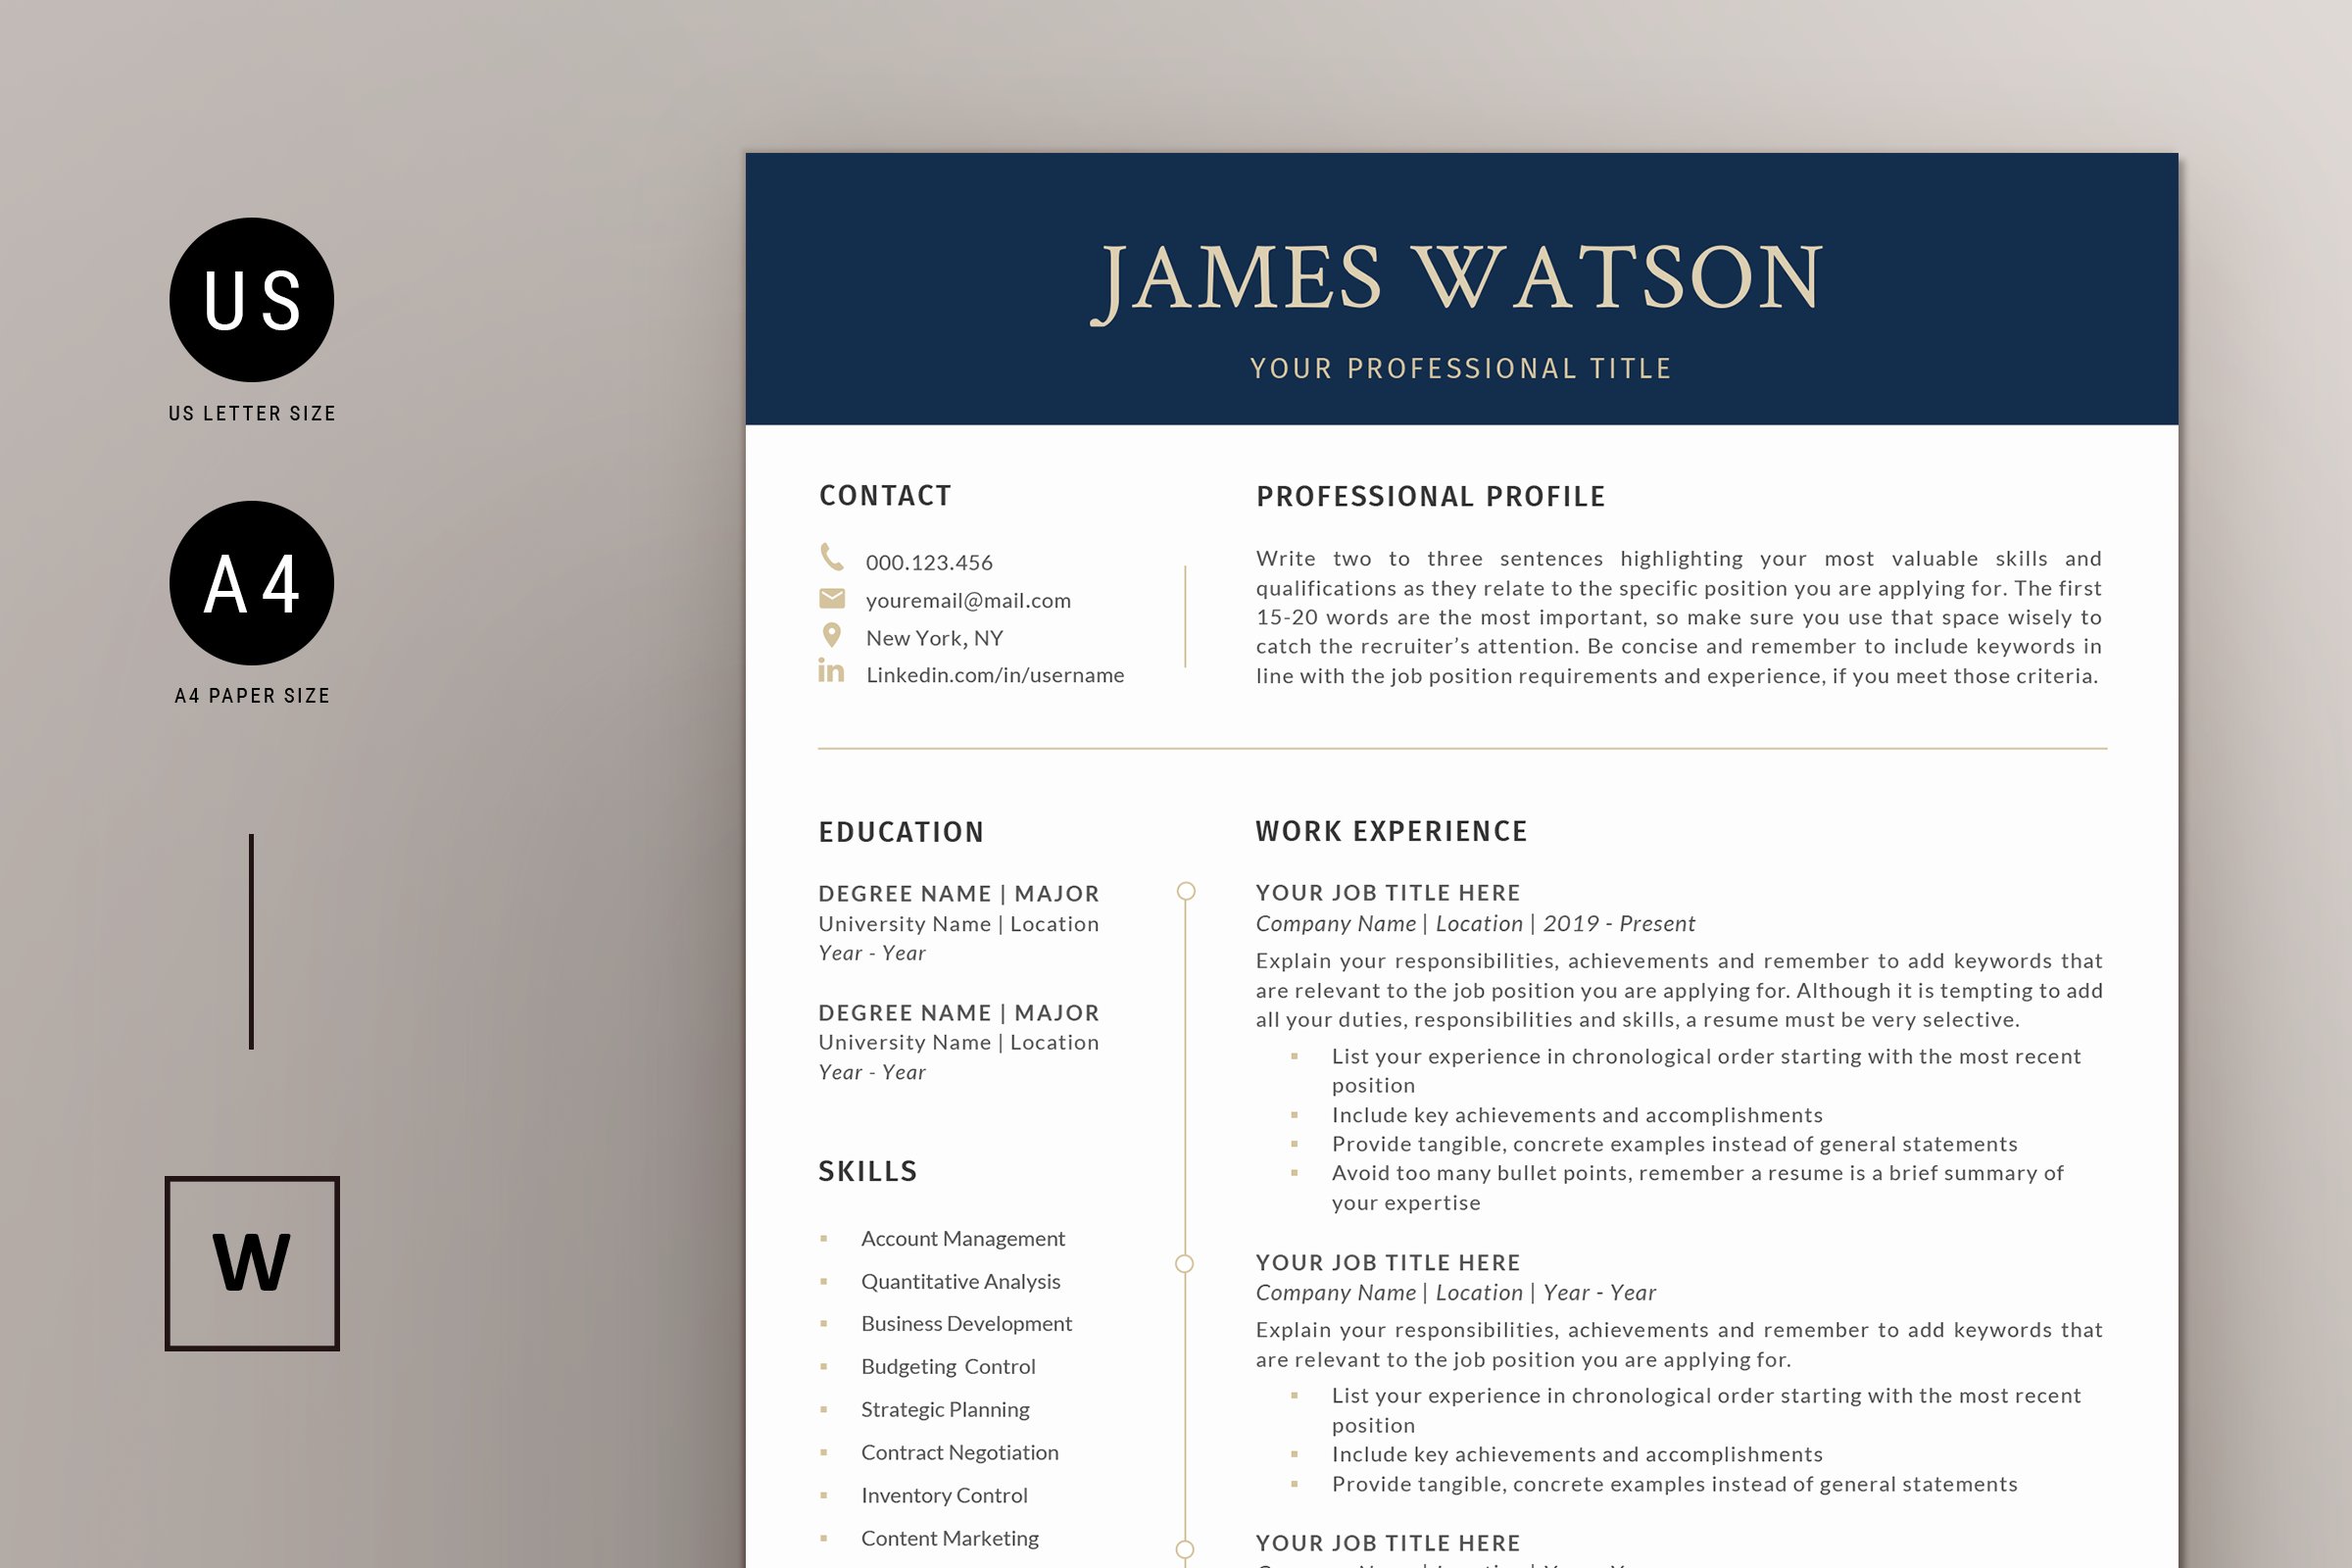 Executive Resume & Cover Letter Word cover image.